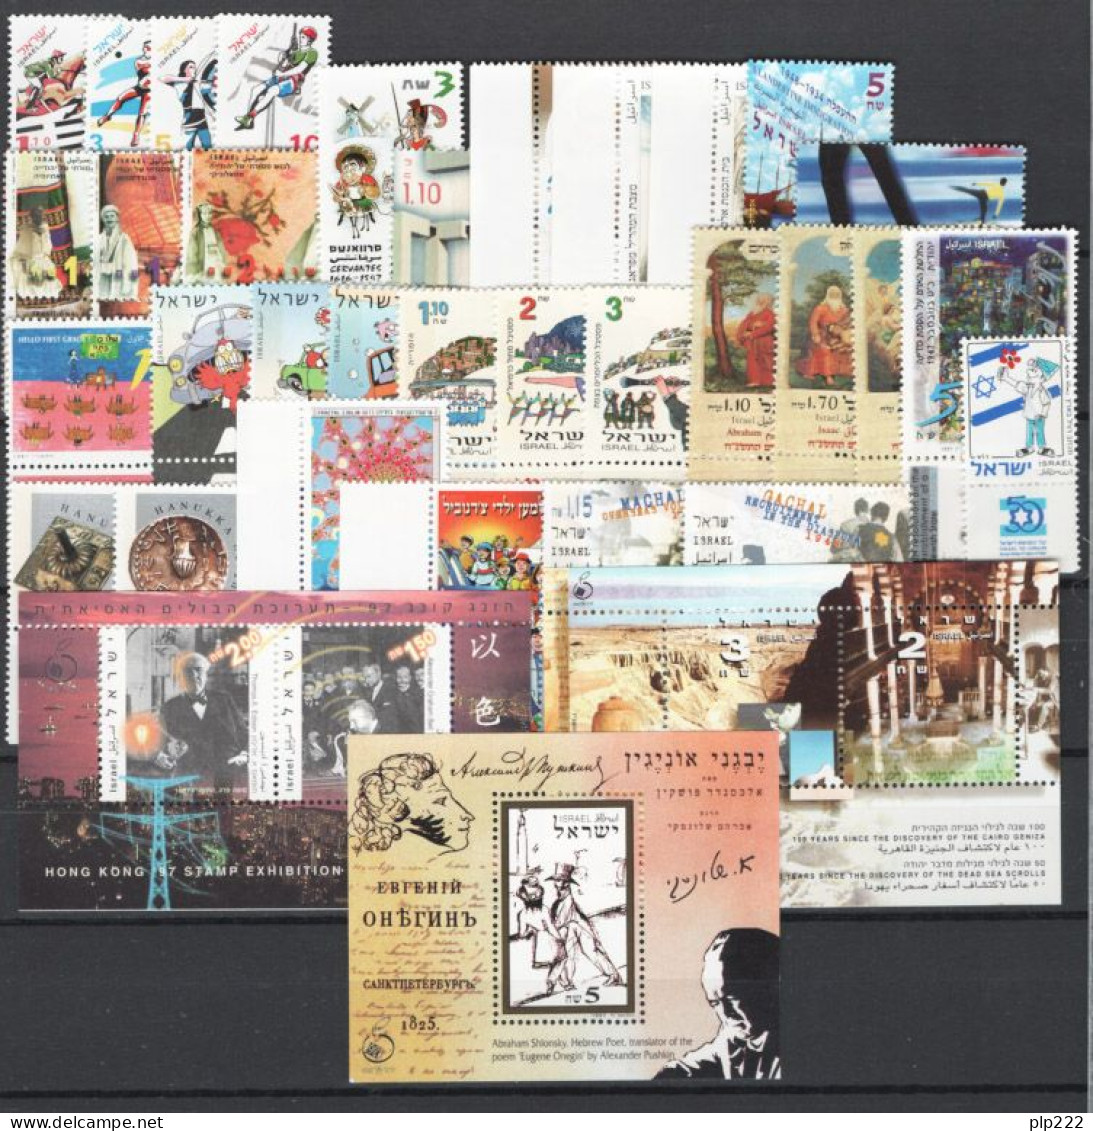 Israele 1997 Annata Completa Con Appendice / Complete Year Set With Tab **/MNH VF - Annate Complete